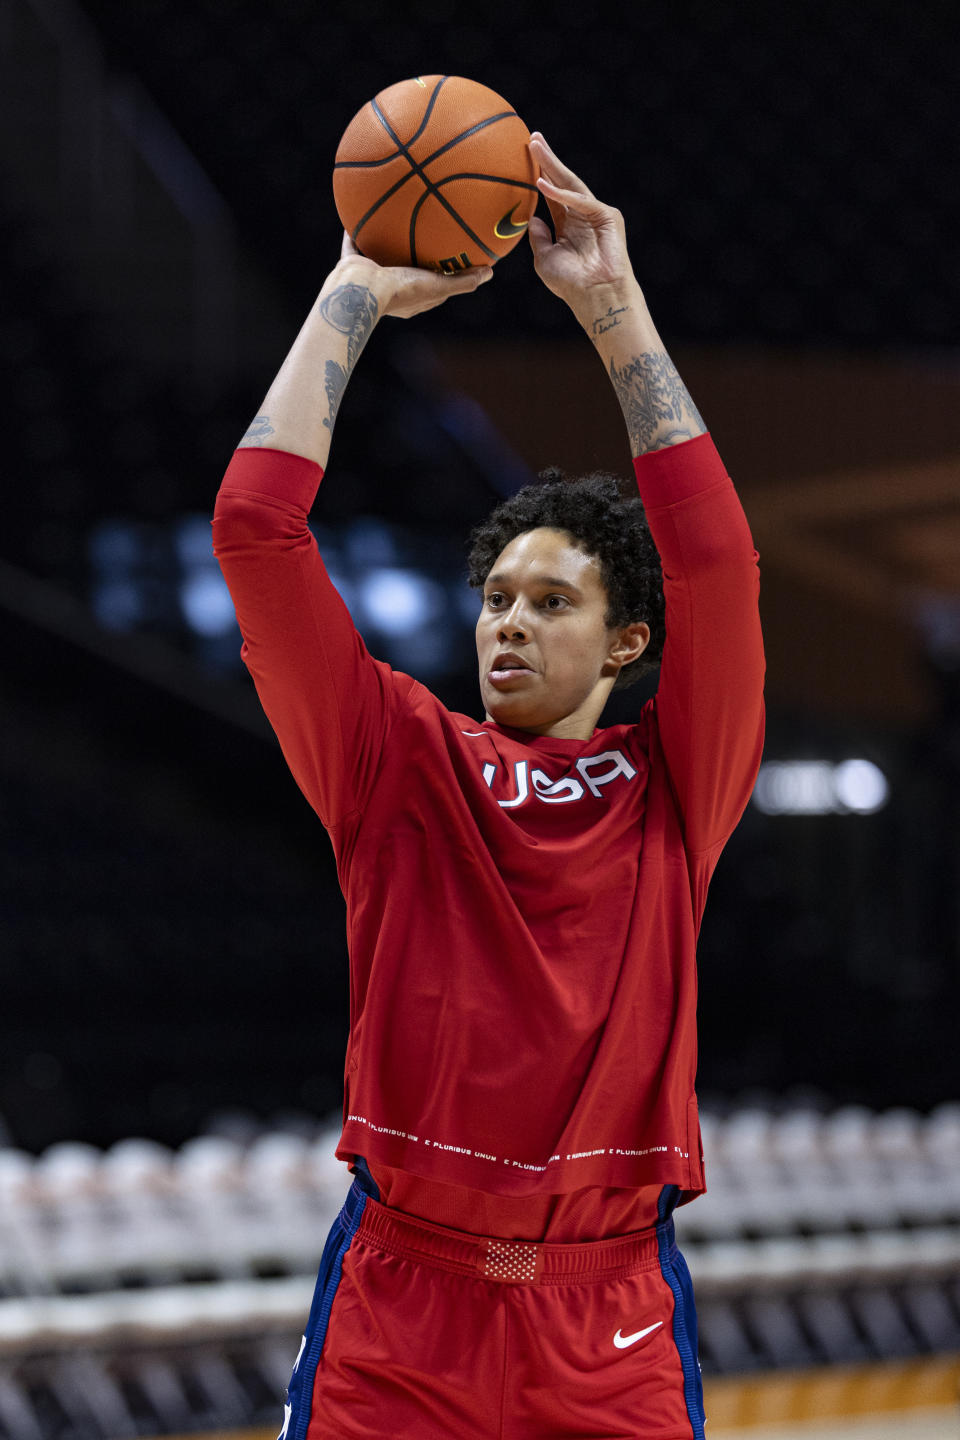 Team USA center Brittany Griner shoots during warmups before an NCAA college basketball exhibition game against Tennessee, Sunday, Nov. 5, 2023, in Knoxville, Tenn. (AP Photo/Wade Payne)